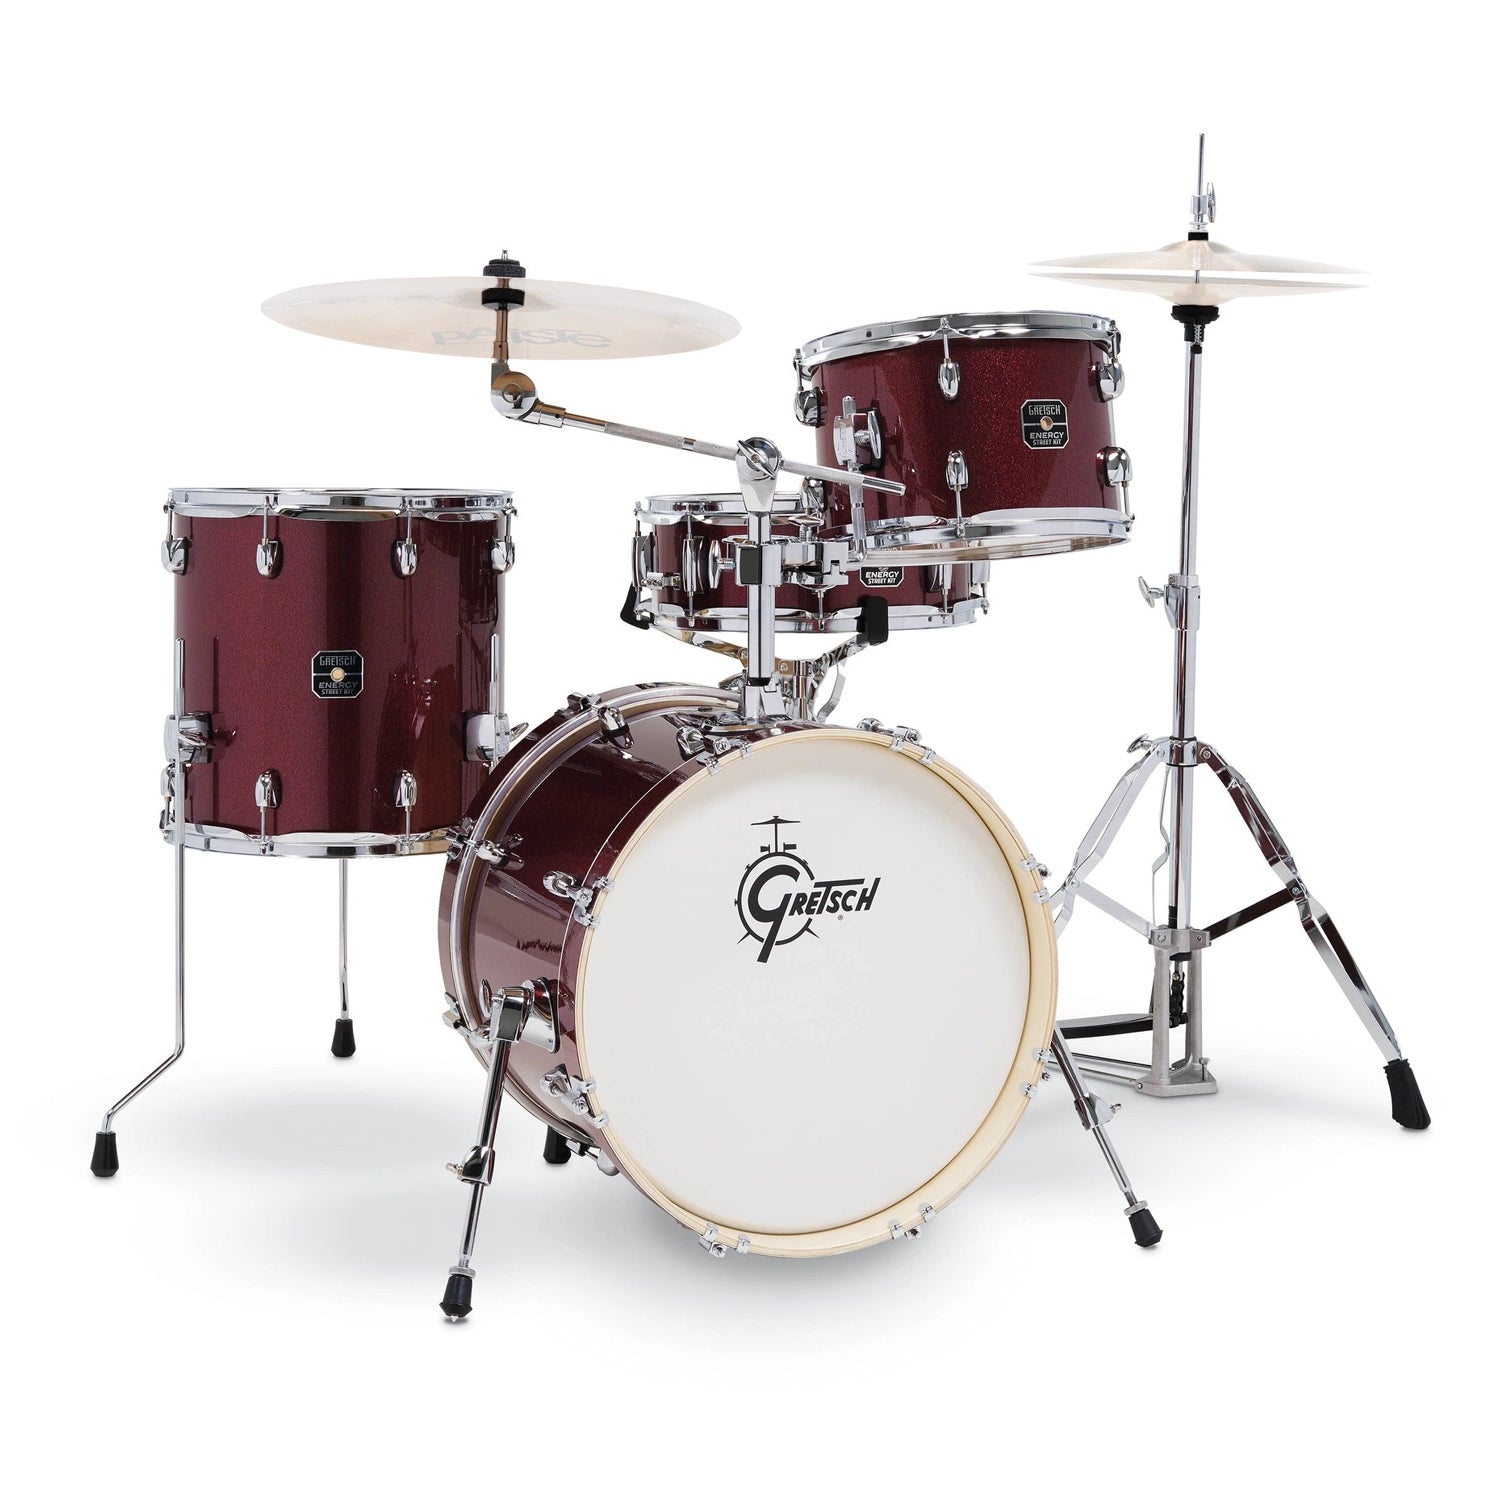 Gretsch Energy 4 Piece Drum Kit with 18″ Bass Drum - Red Sparkle